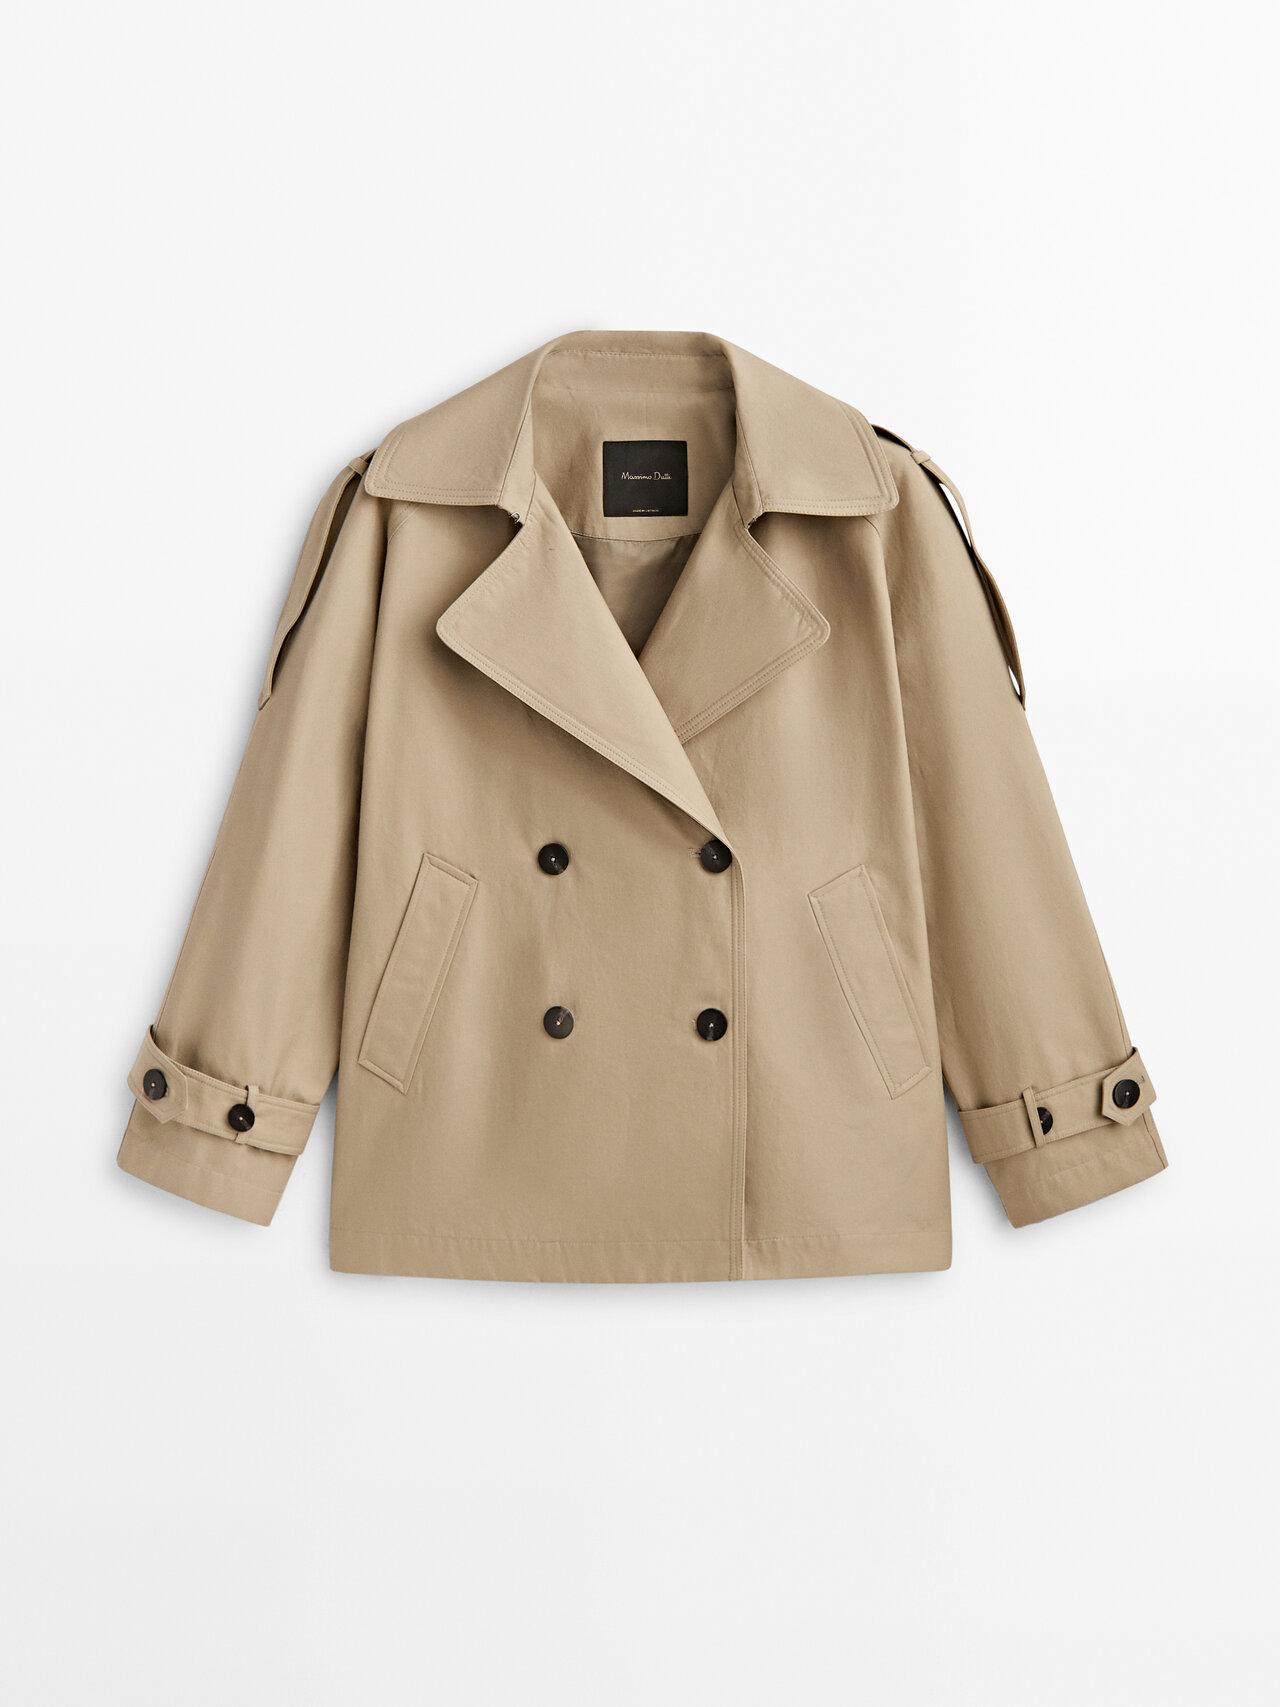 MASSIMO DUTTI Short Buttoned Trench Coat in Natural | Lyst